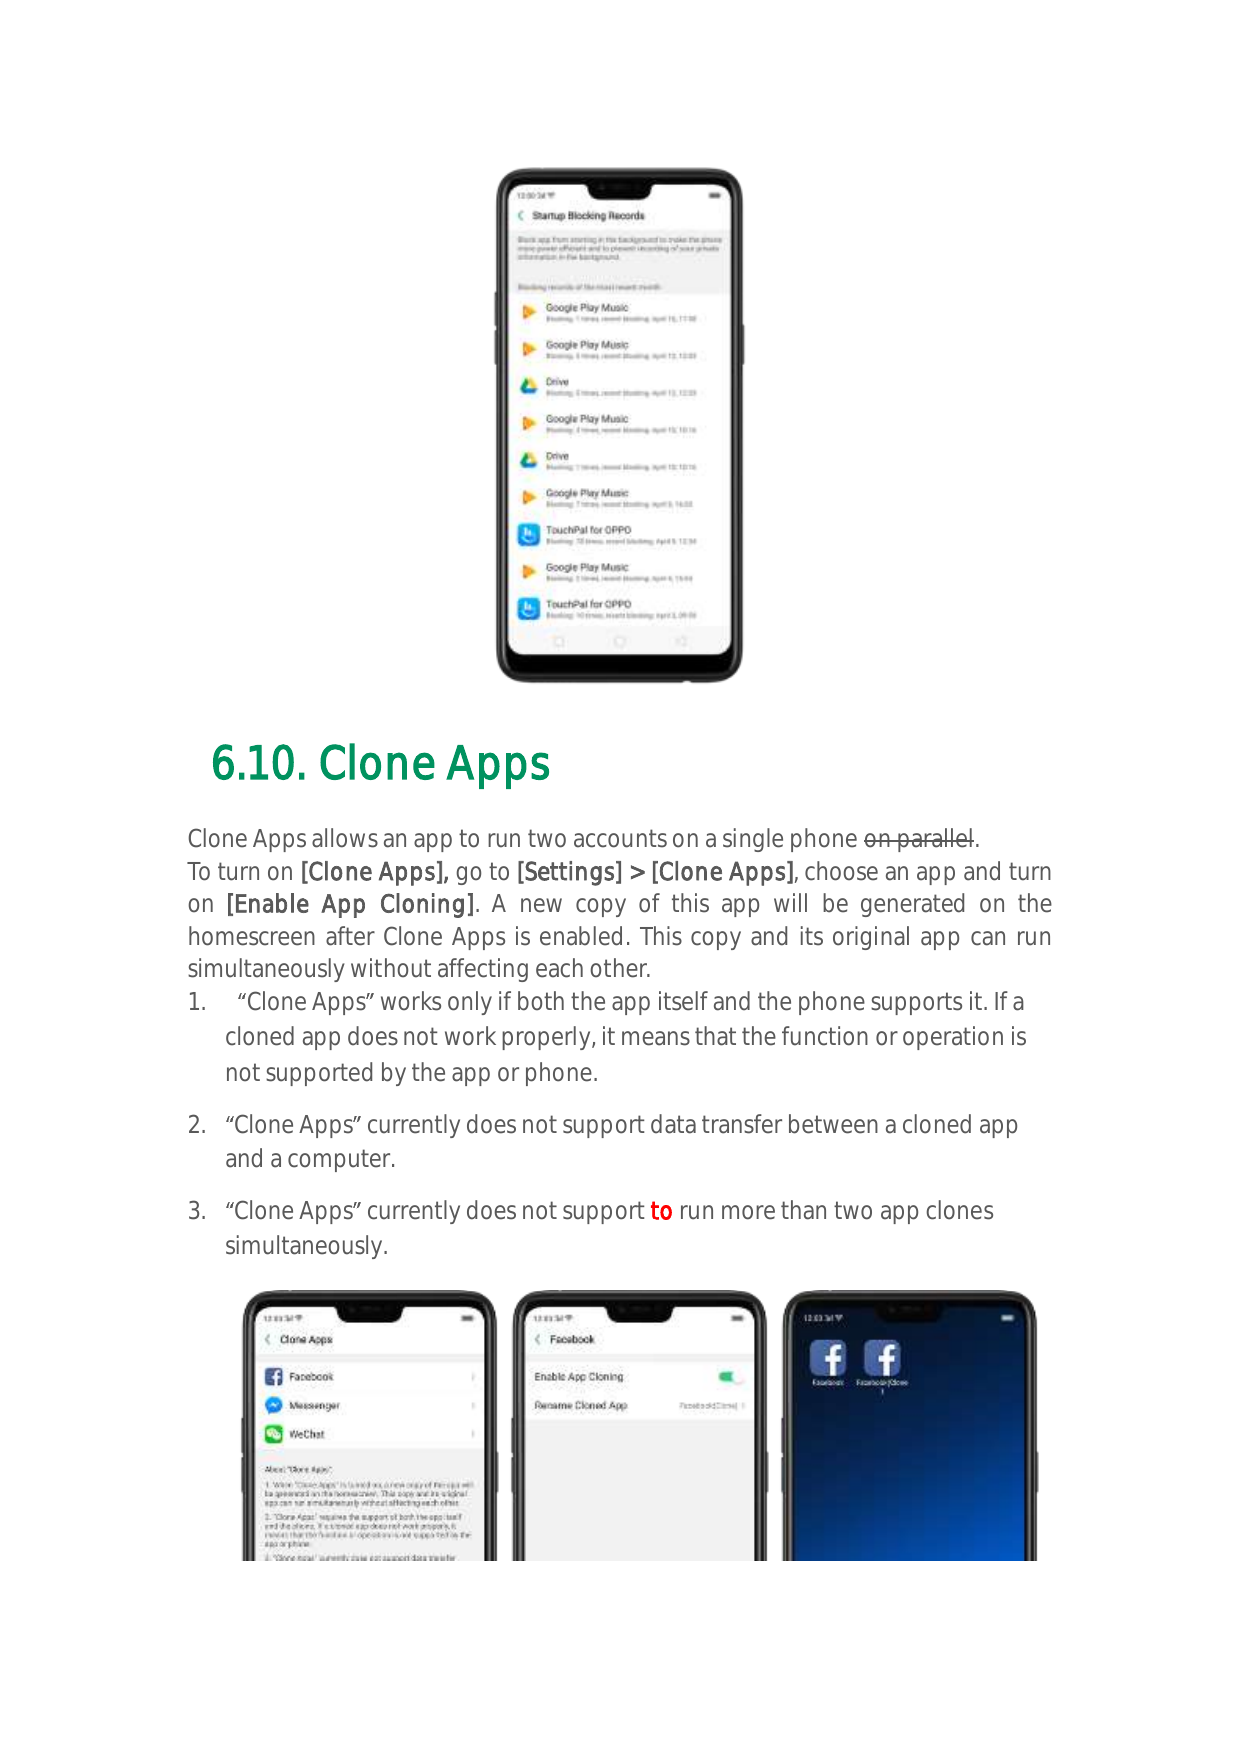 6.10. Clone AppsClone Apps allows an app to run two accounts on a single phone on parallel.To turn on [Clone Apps], go to [Setti